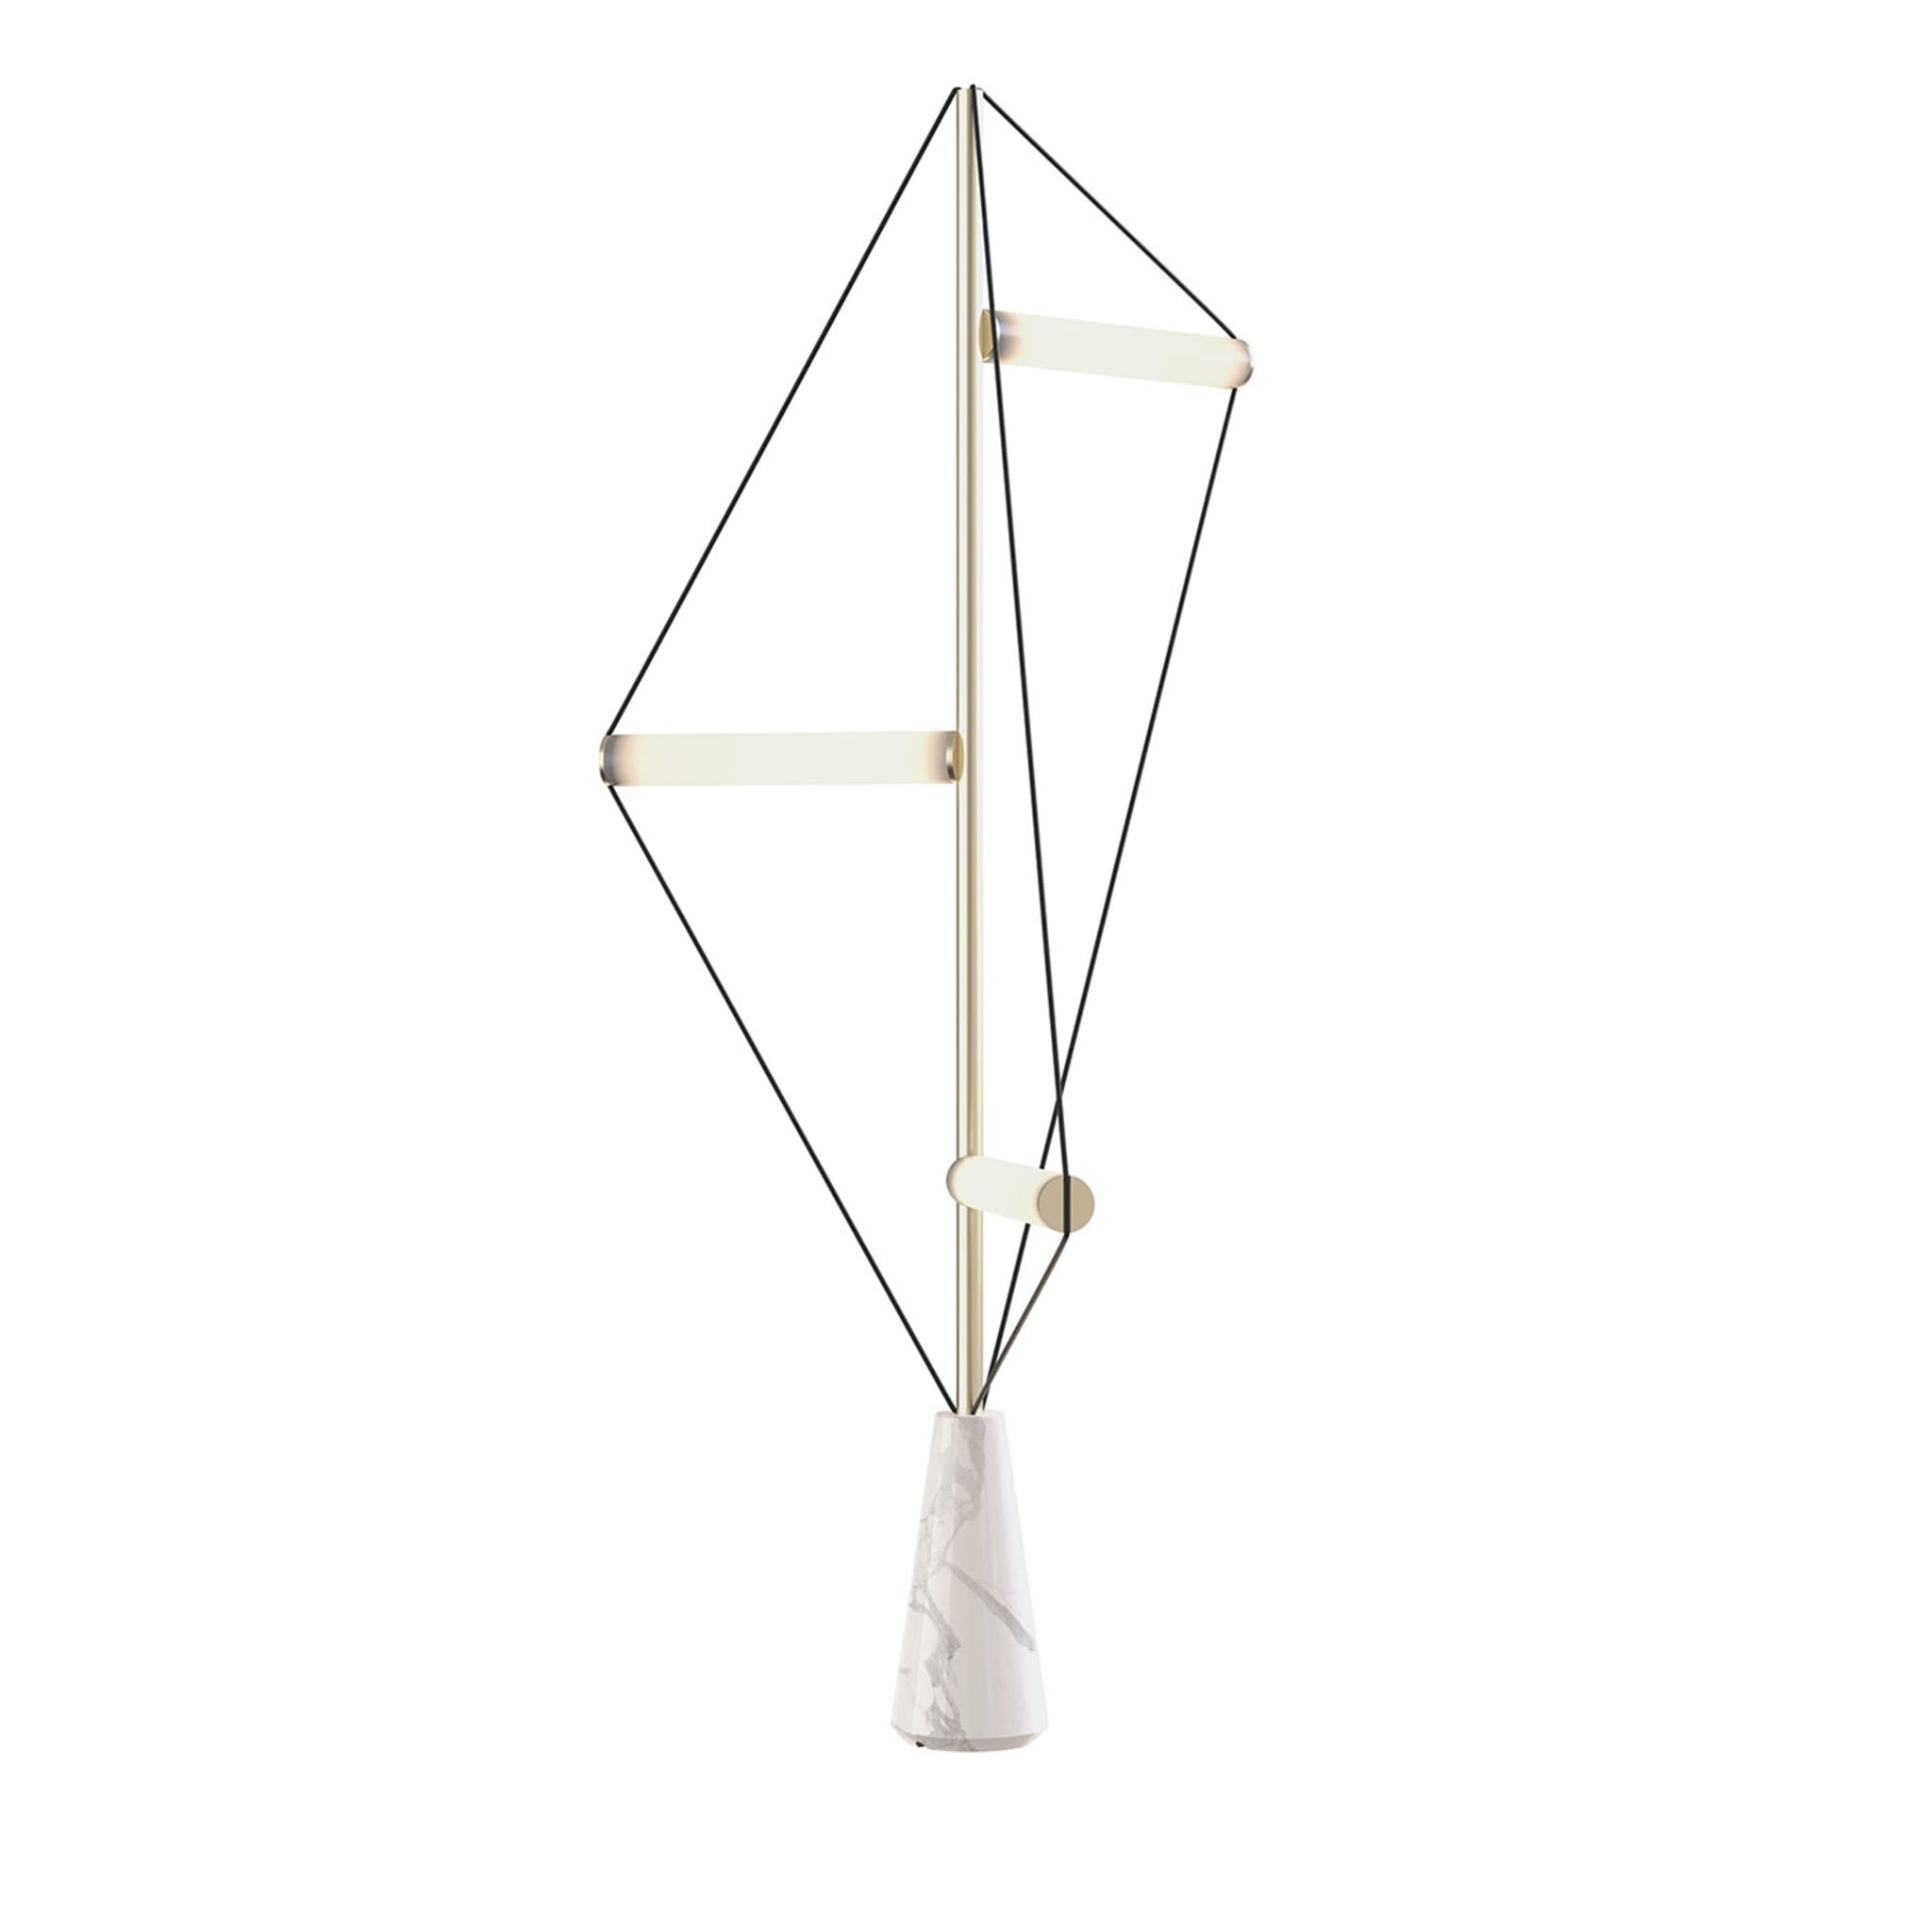 Ed047 Brass Floor Lamp with White Base - Main view